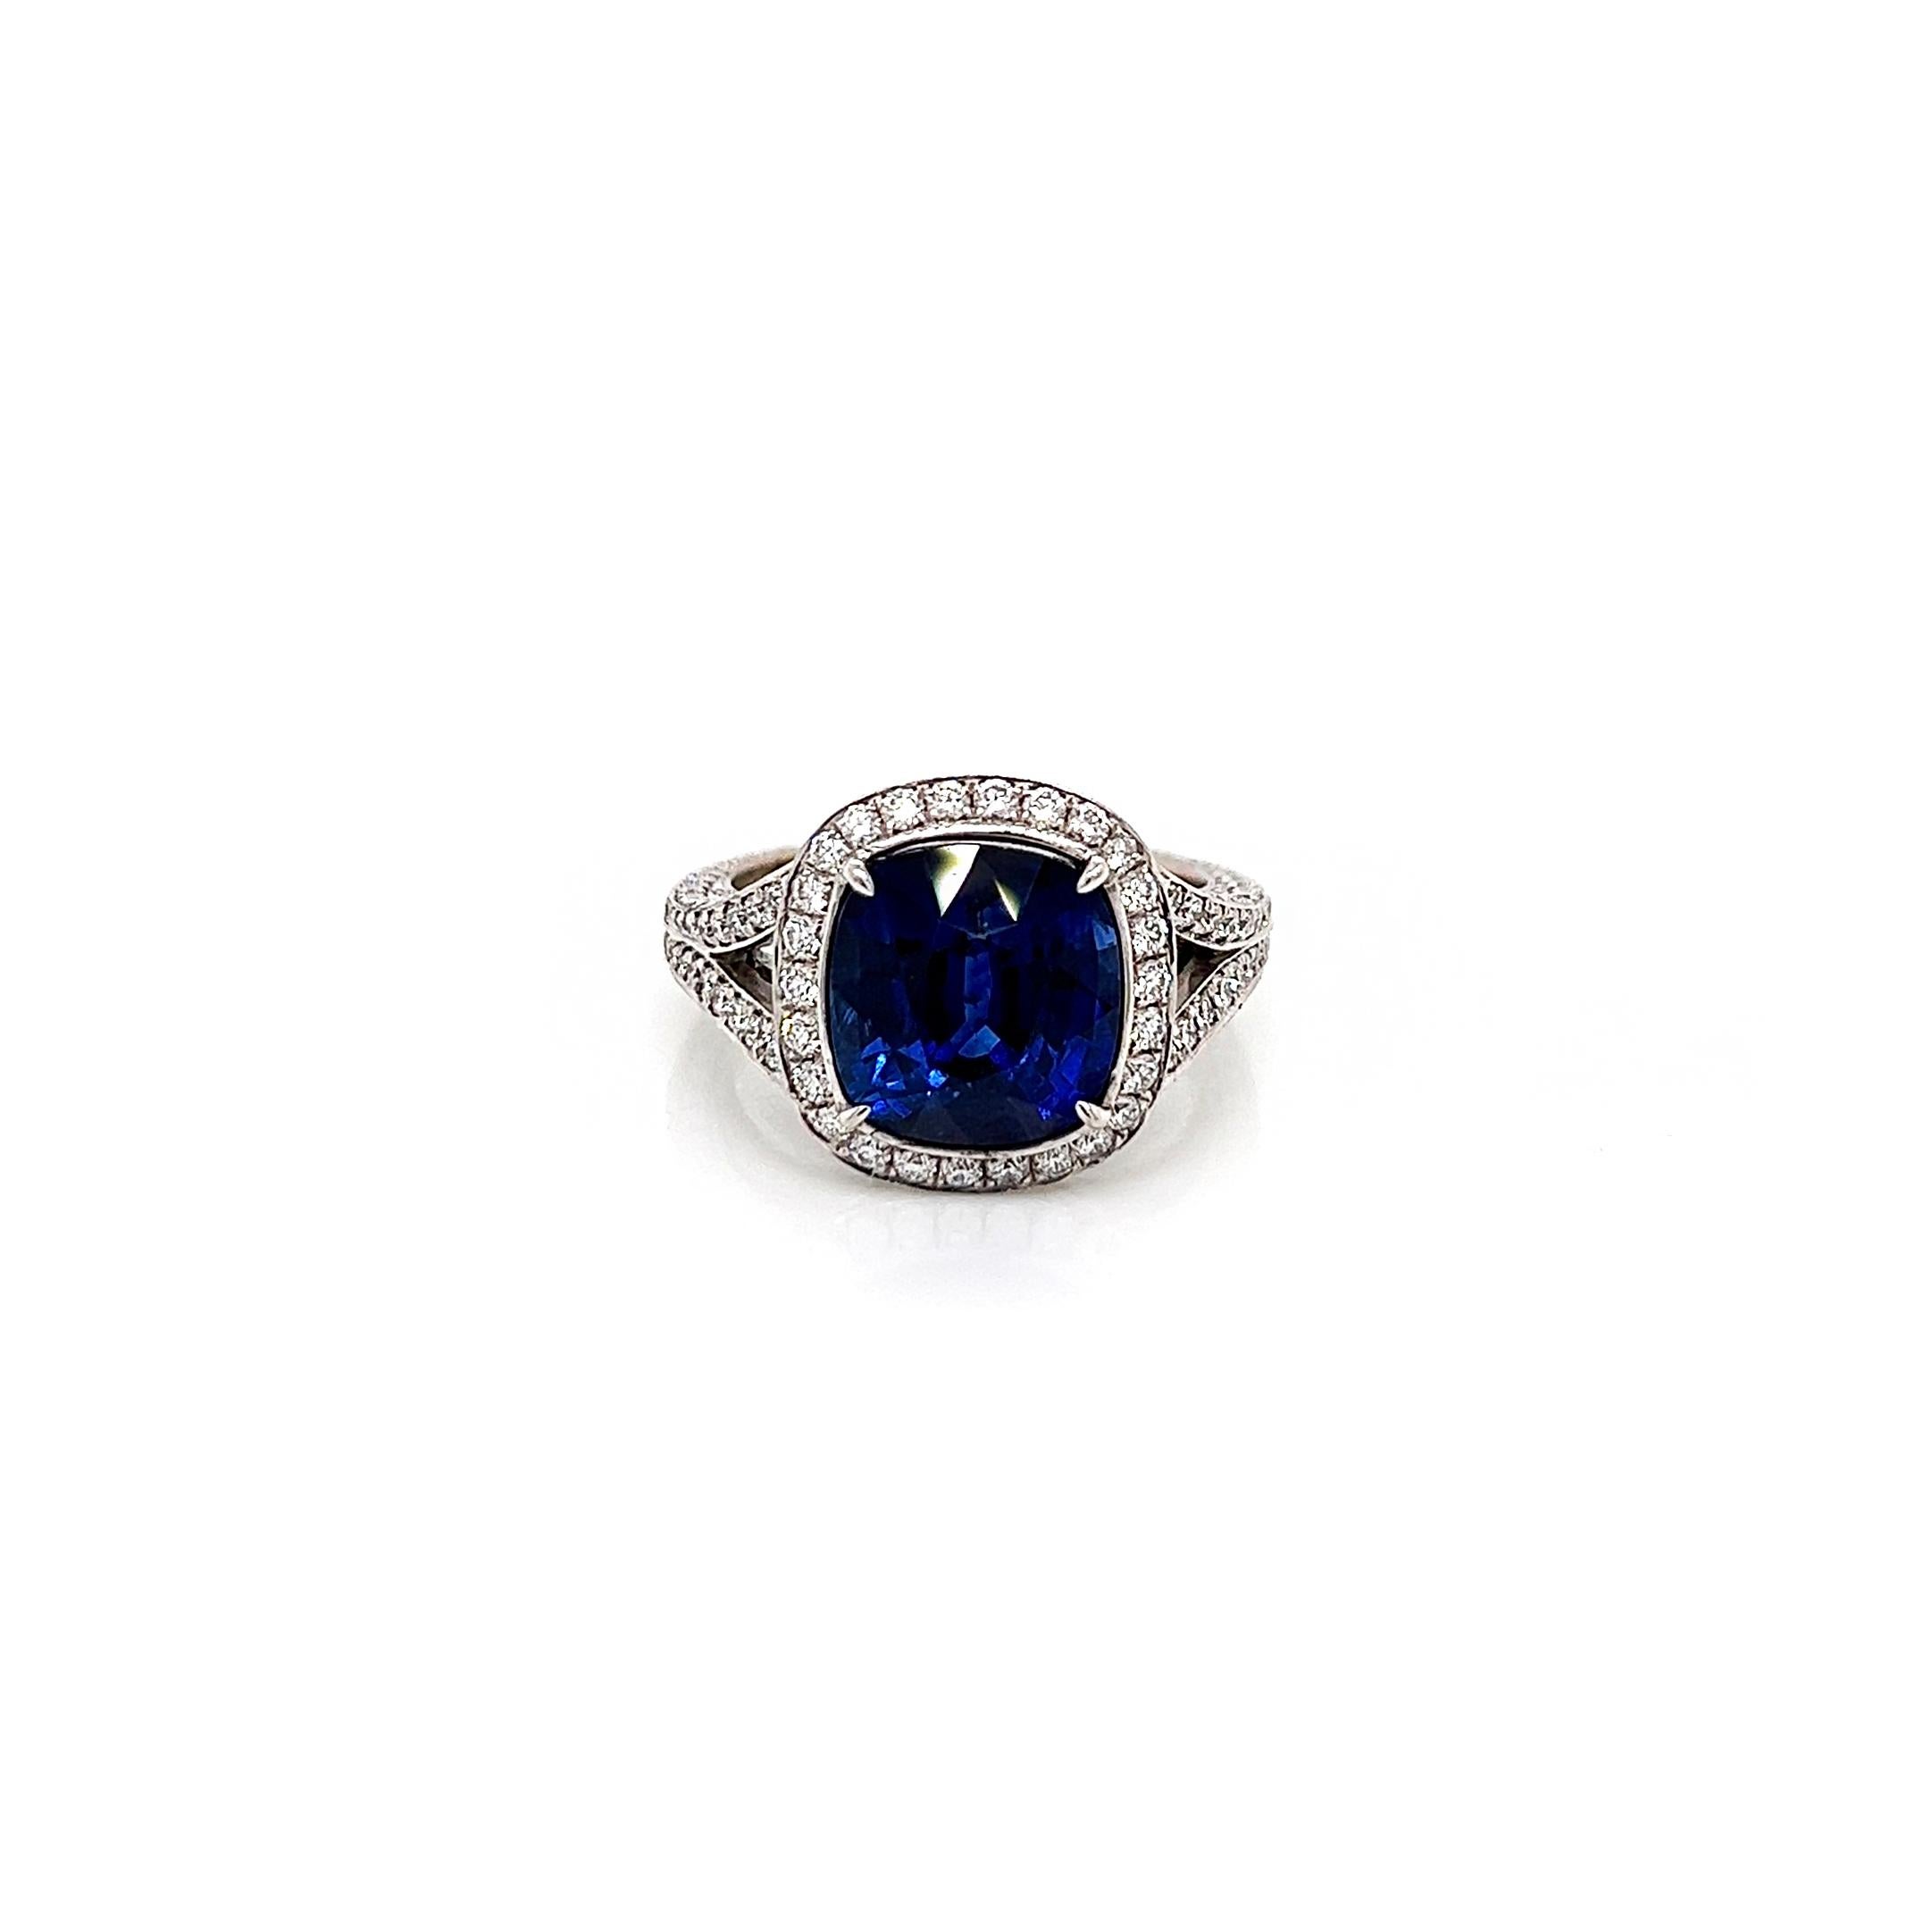 7.09 Total Carat Sapphire and Diamond Halo Pave-Set Ladies Engagement Ring

-Metal Type: 18K White Gold
-5.41 Carat Cushion Cut Natural Blue Sapphire
-1.68 Carat Round Natural Diamonds. F-G Color, VS1-VS2 Clarity 

-Size 6.75

Made in New York City.
